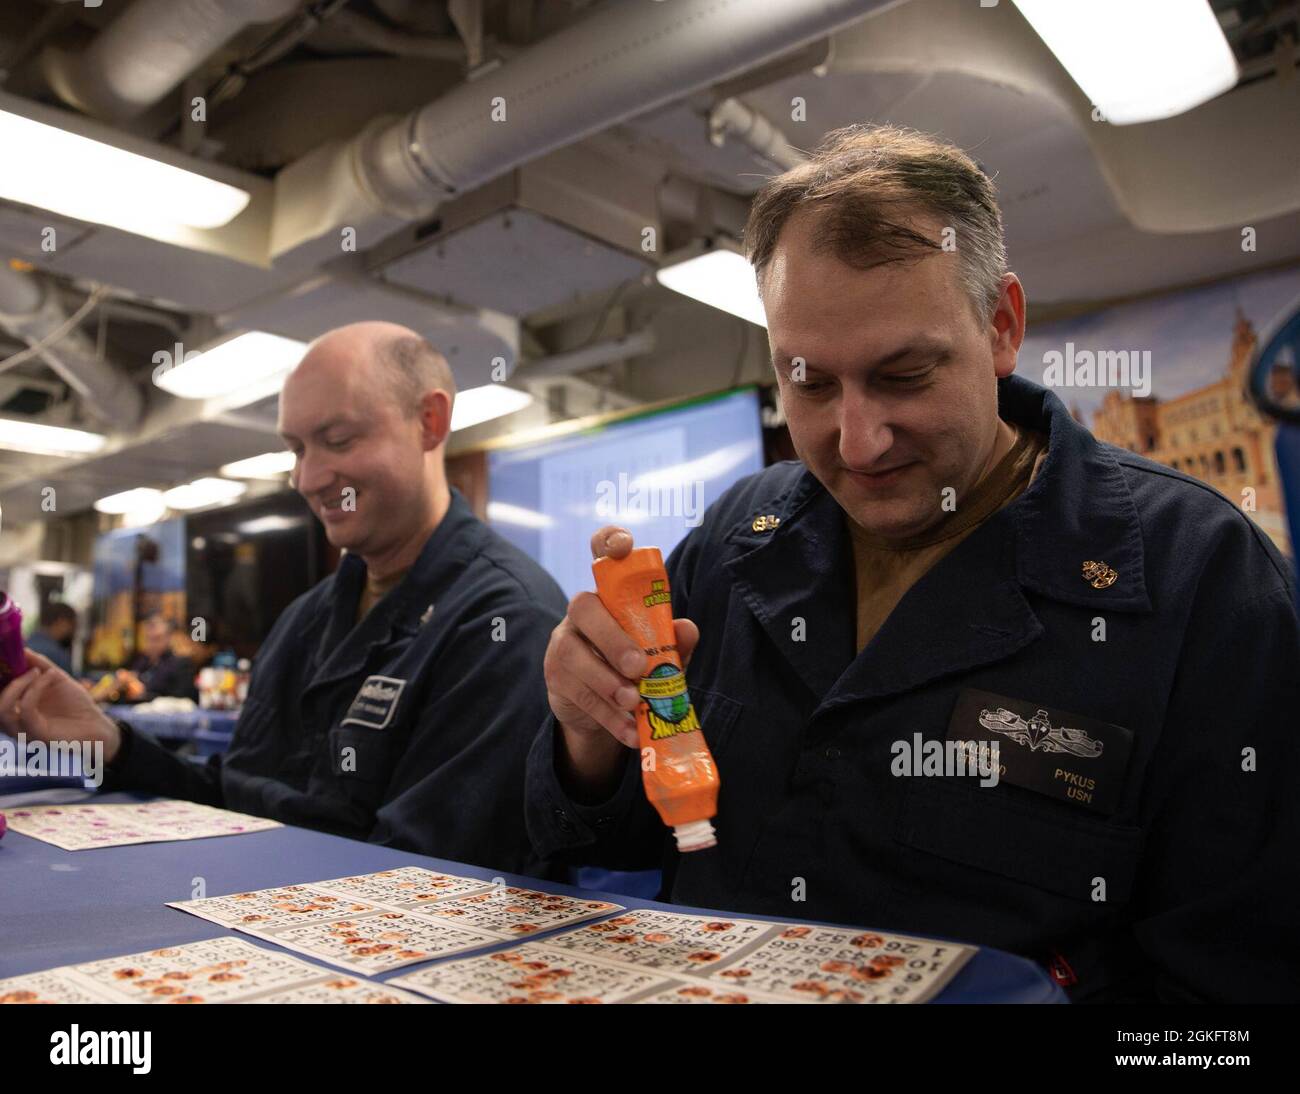 210411-N-CJ510-0030 MEDITERRANEAN SEA (April 11, 2021) Chief Cryptologic Technician (Collection) William Pykus, left, stamps a bingo card on the mess decks of the Arleigh Burke-class guided-missile destroyer USS Roosevelt (DDG 80) during a game of bingo, April 11, 2021. Roosevelt, forward-deployed to Rota, Spain, is on its second patrol in the U.S. Sixth Fleet area of operations in support of regional allies and partners and U.S. national security interests in Europe and Africa. Stock Photo